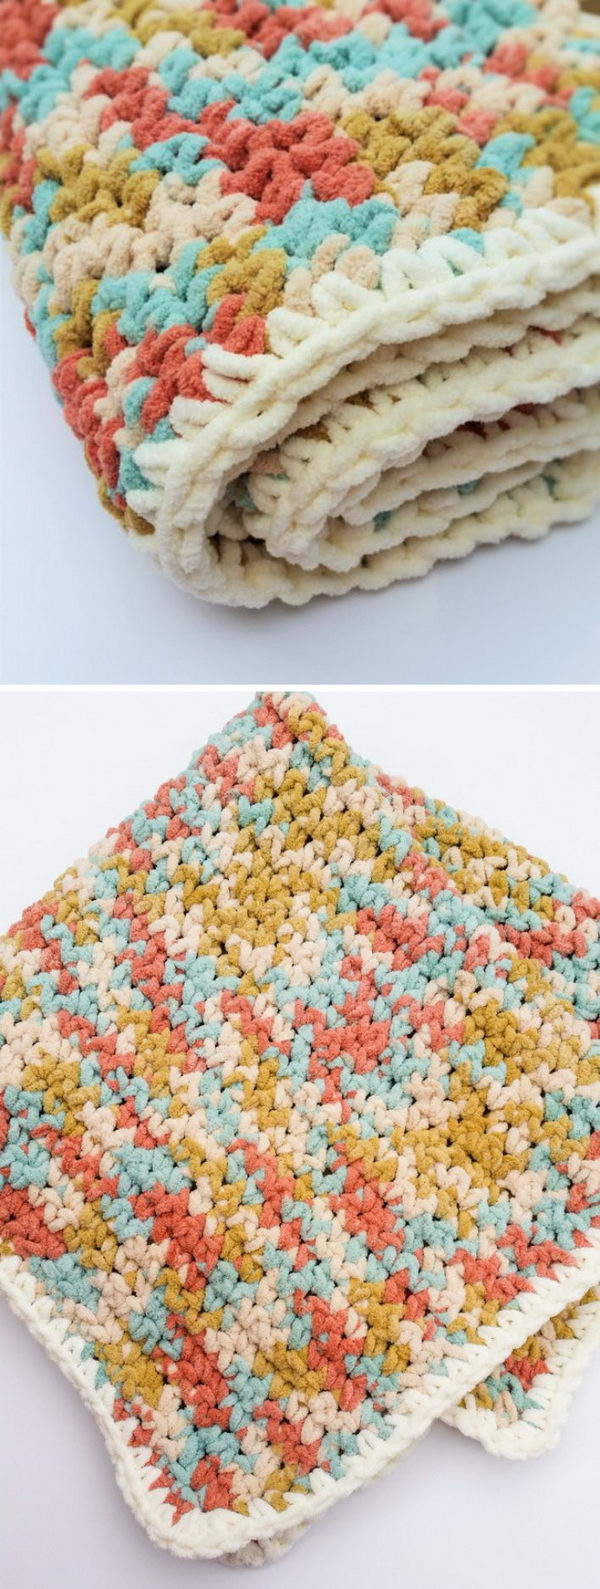 Free Baby Afghan Crochet Patterns 30 Free Crochet Patterns For Blankets Hative